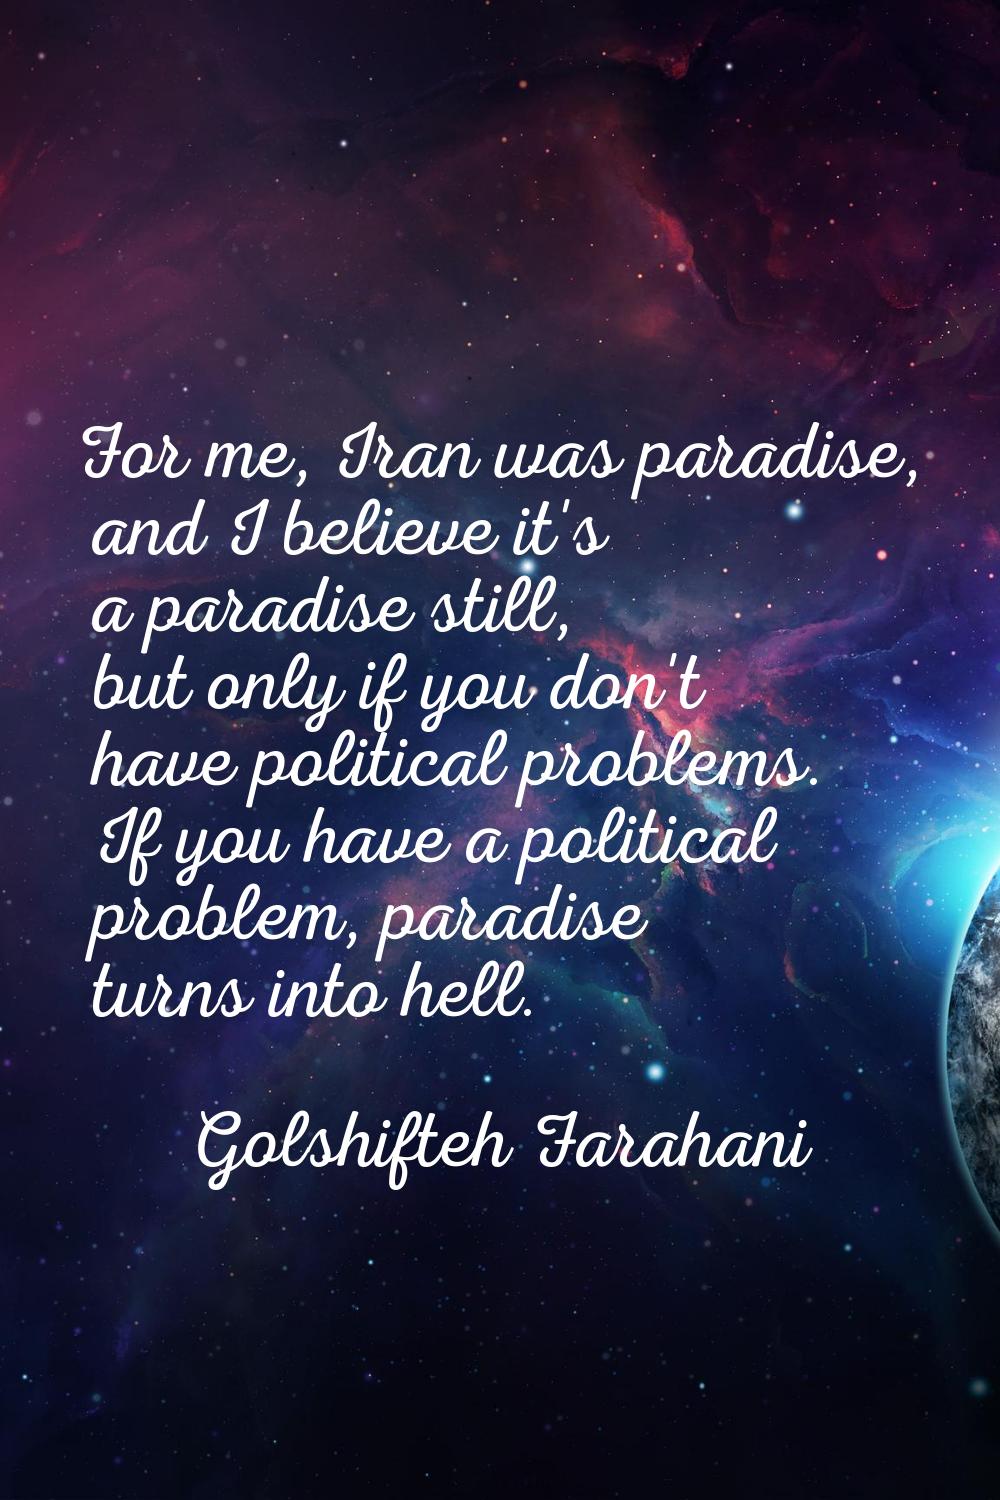 For me, Iran was paradise, and I believe it's a paradise still, but only if you don't have politica